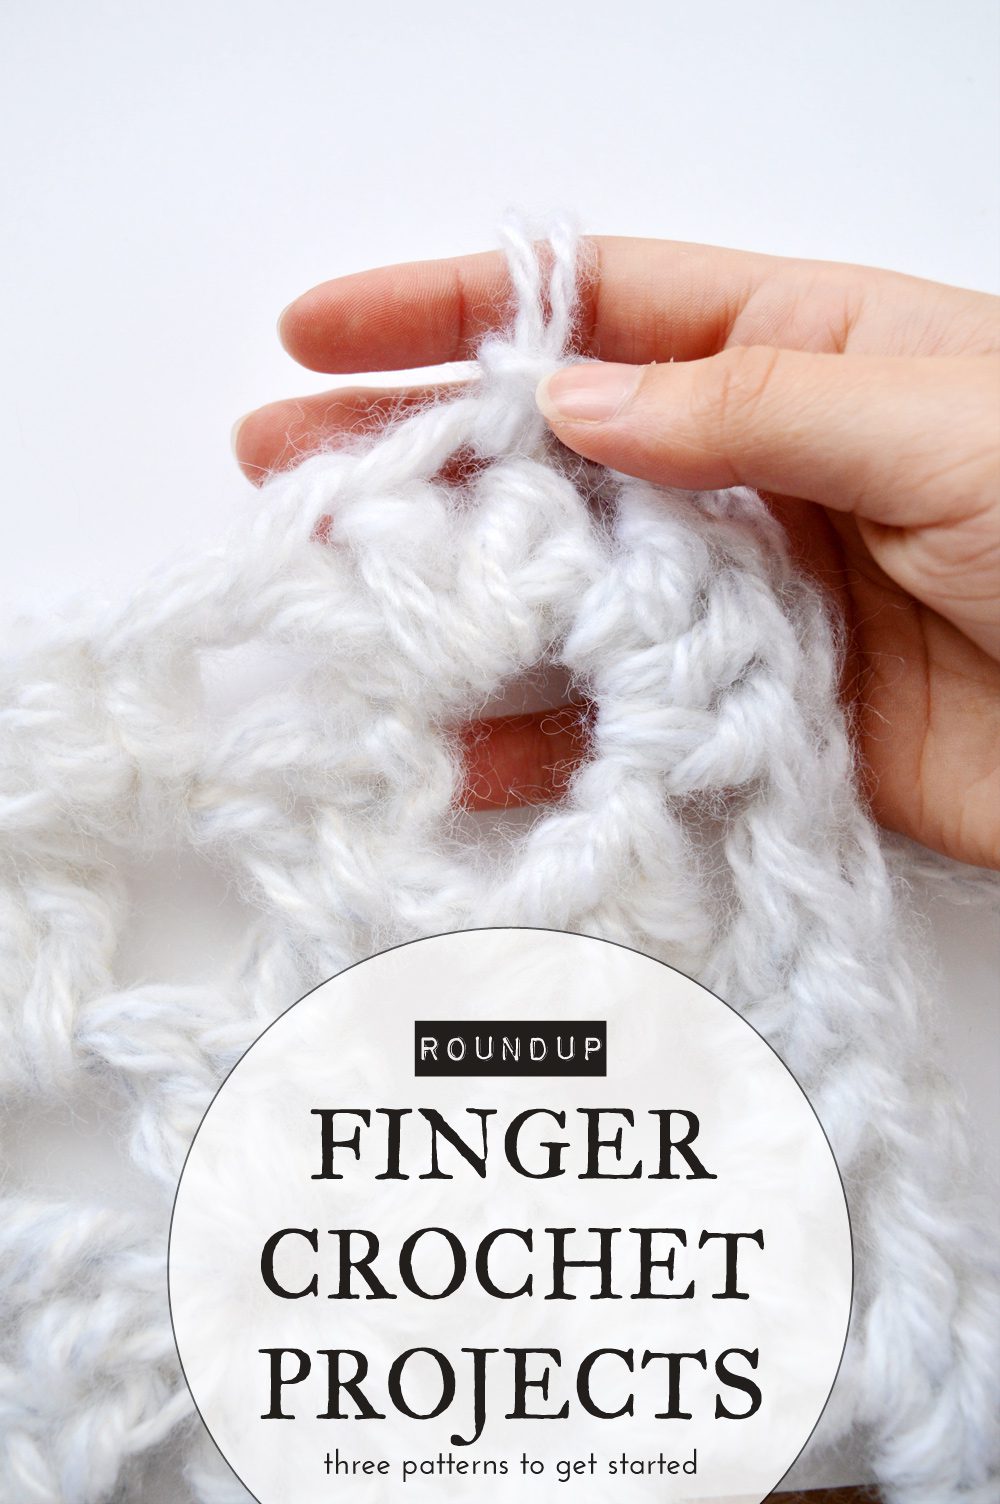 Finger crochet projects to get started